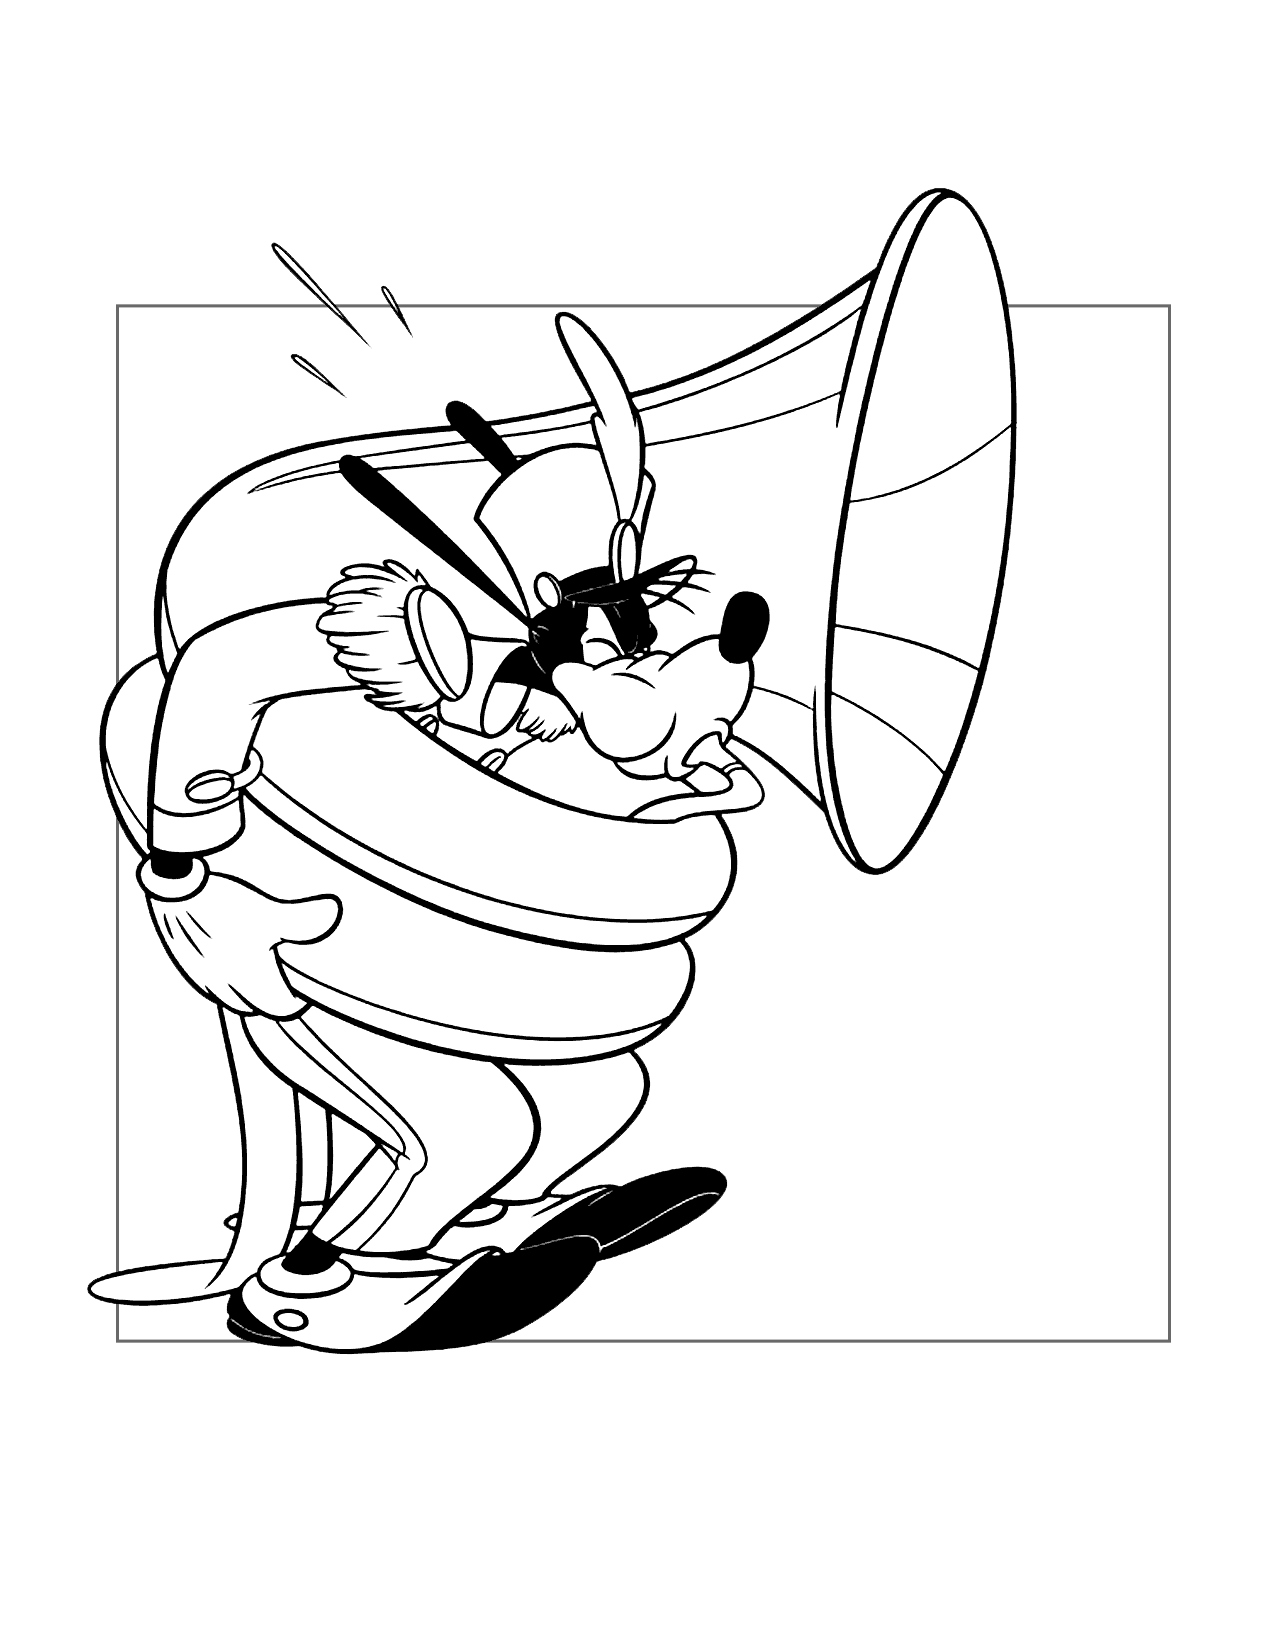 Goofy Plays The Tuba Coloring Page